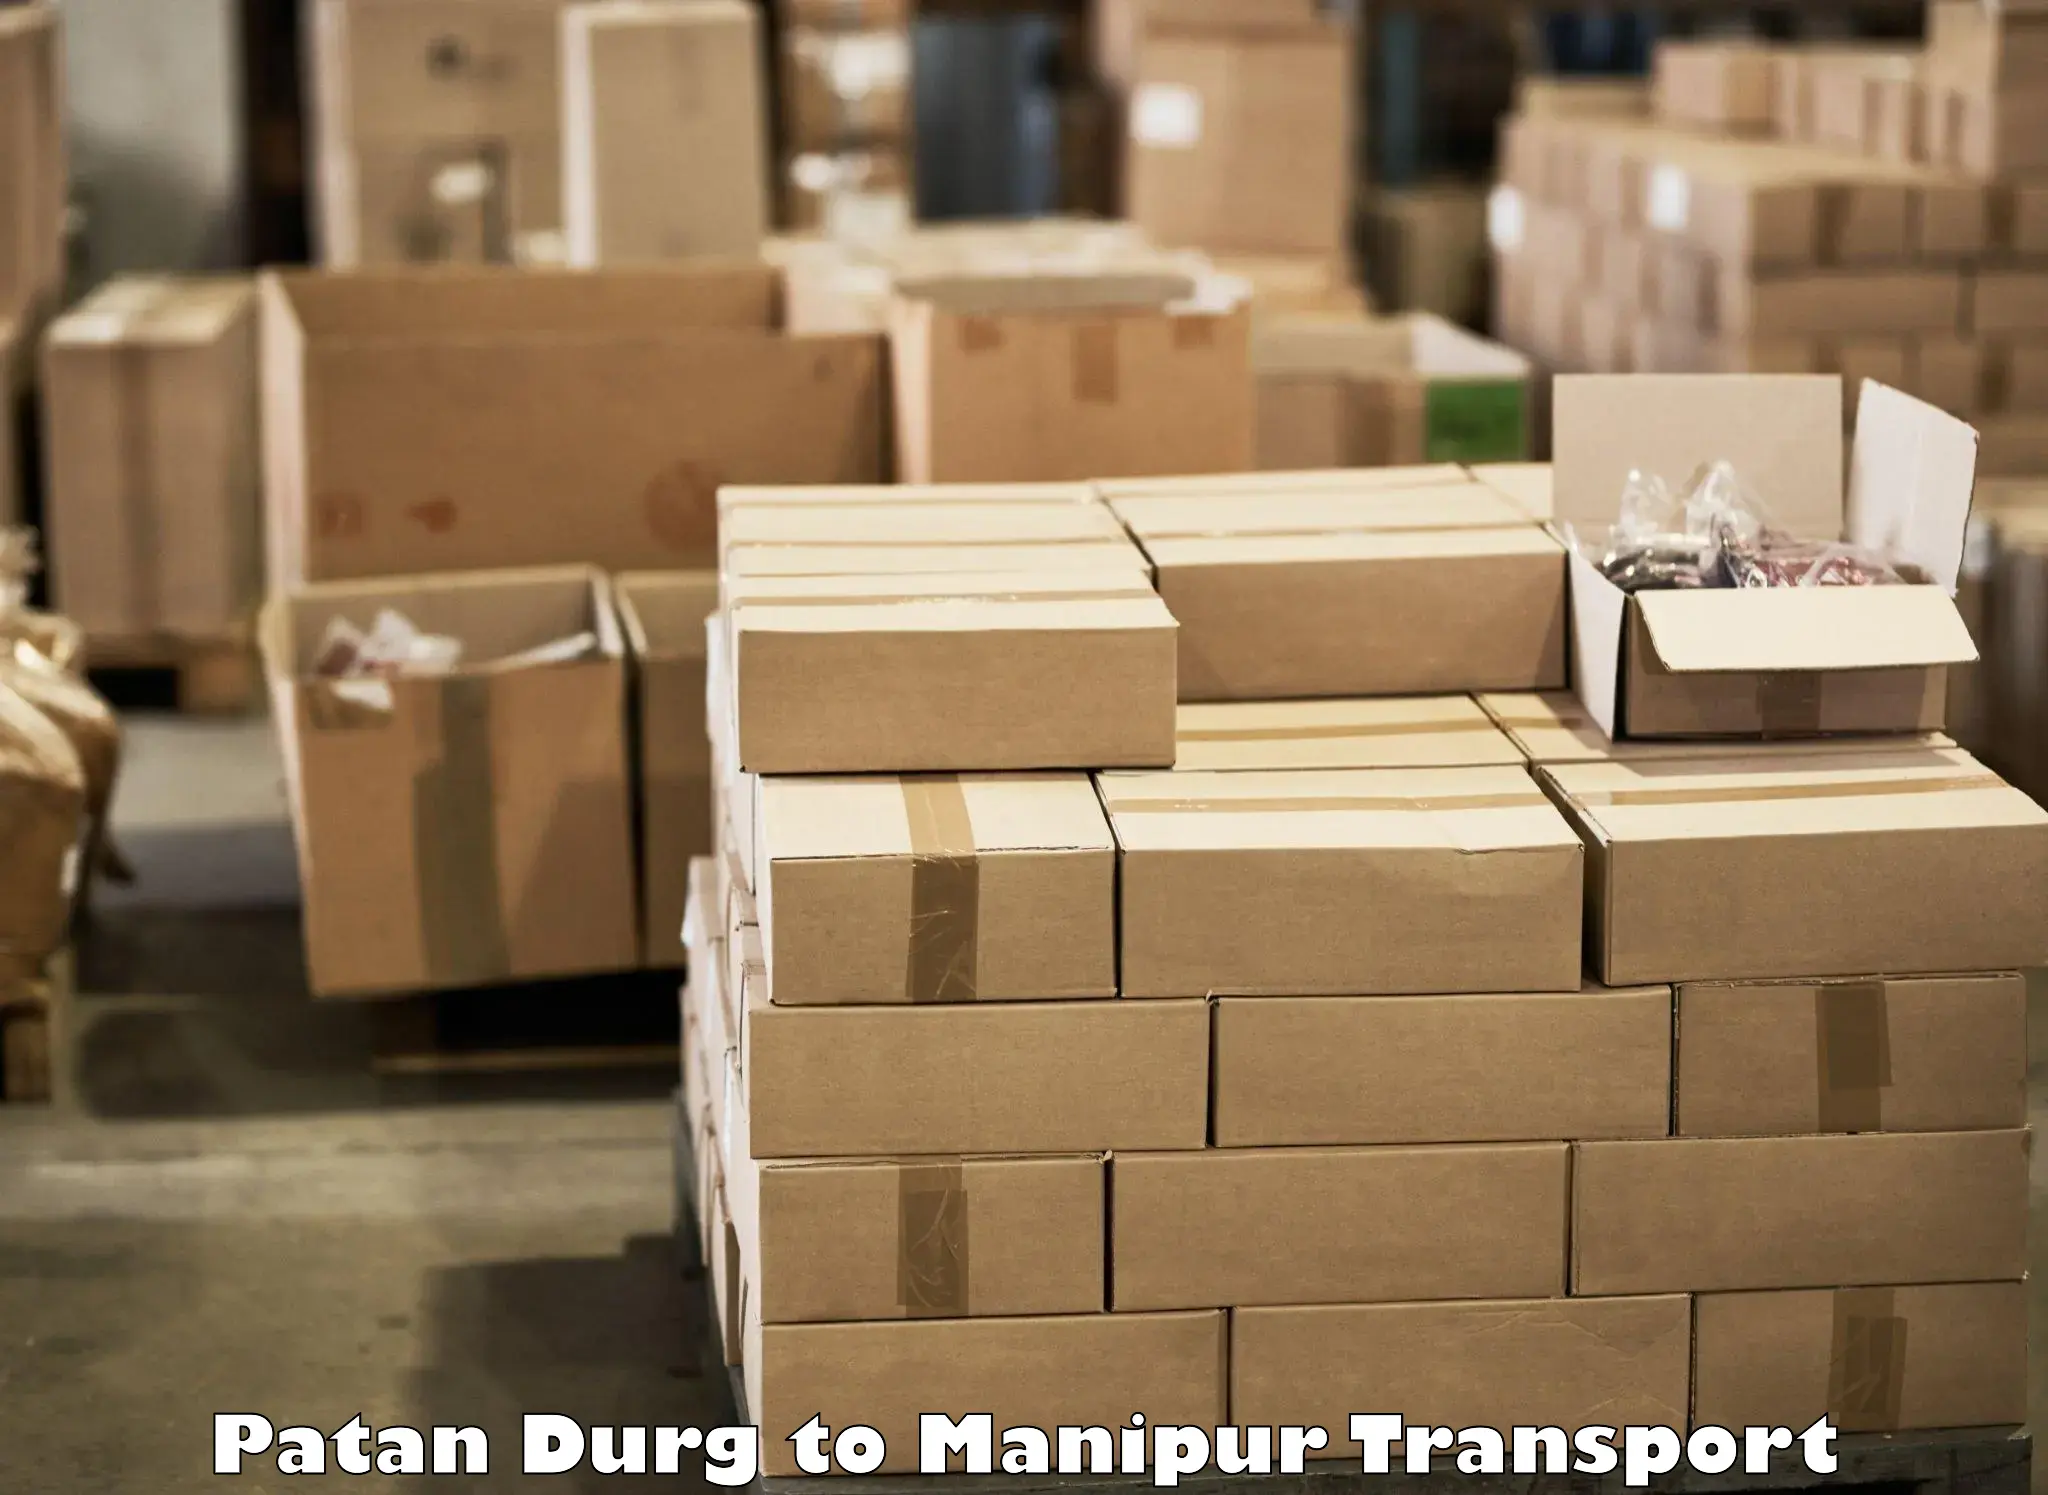 Commercial transport service Patan Durg to Moirang